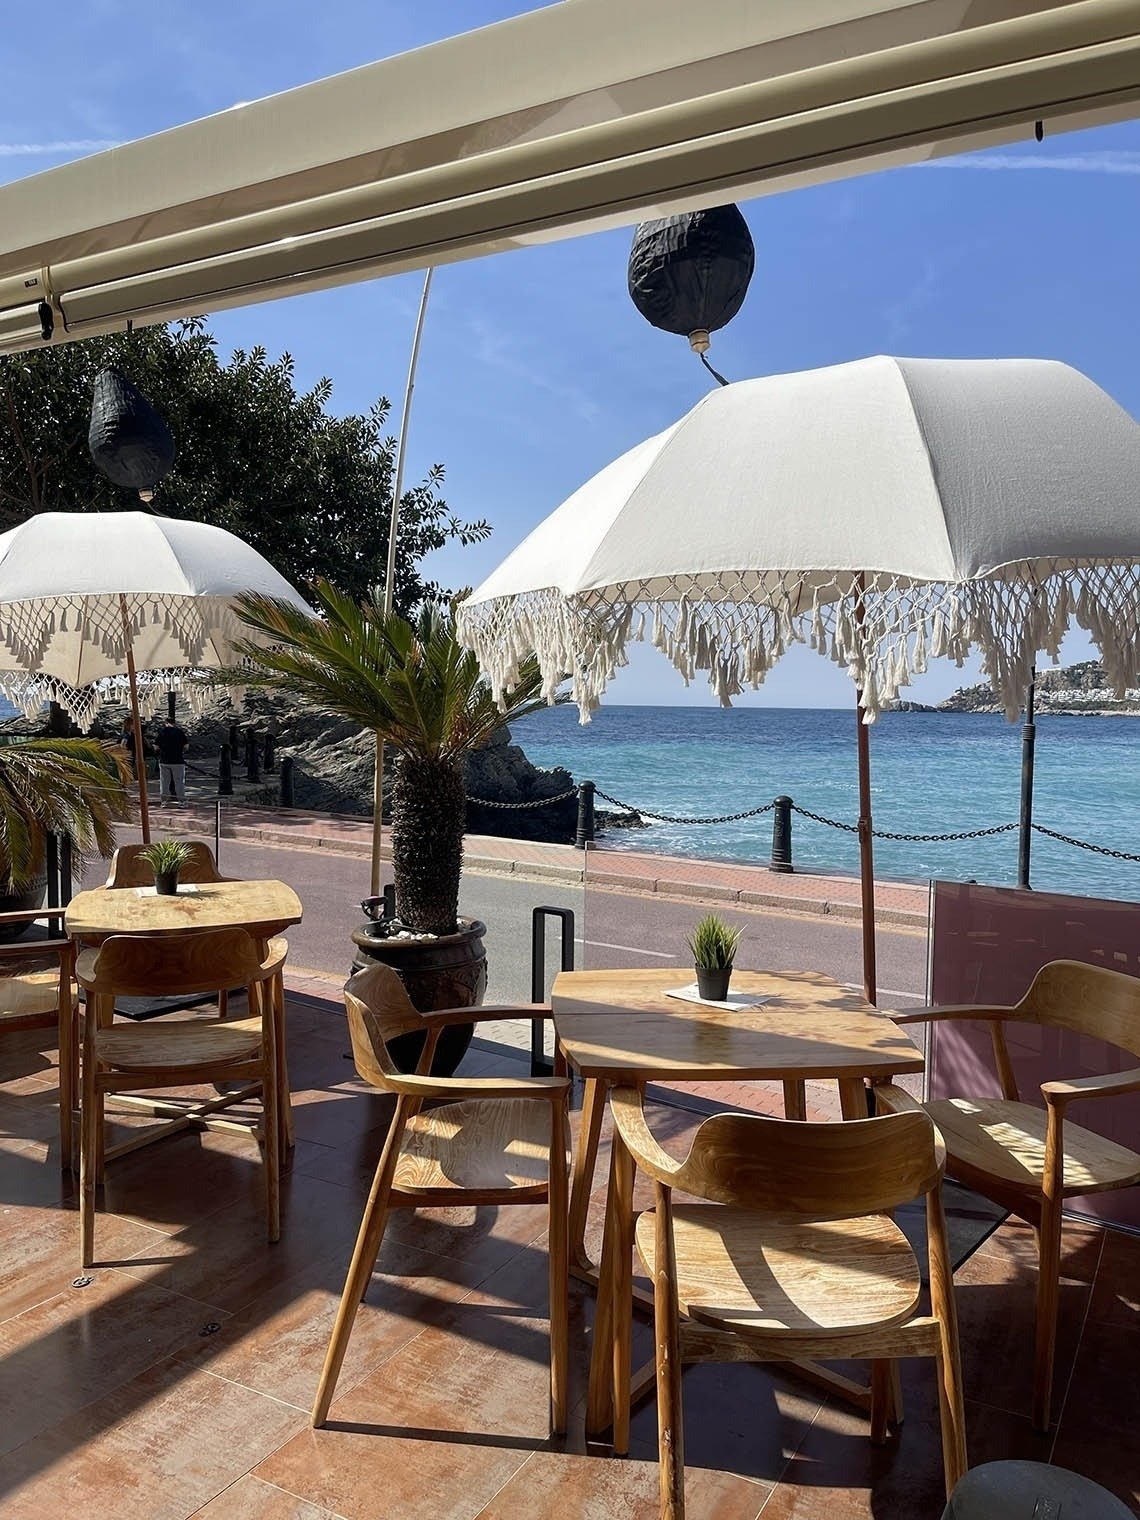 tables and chairs with umbrellas overlooking the ocean